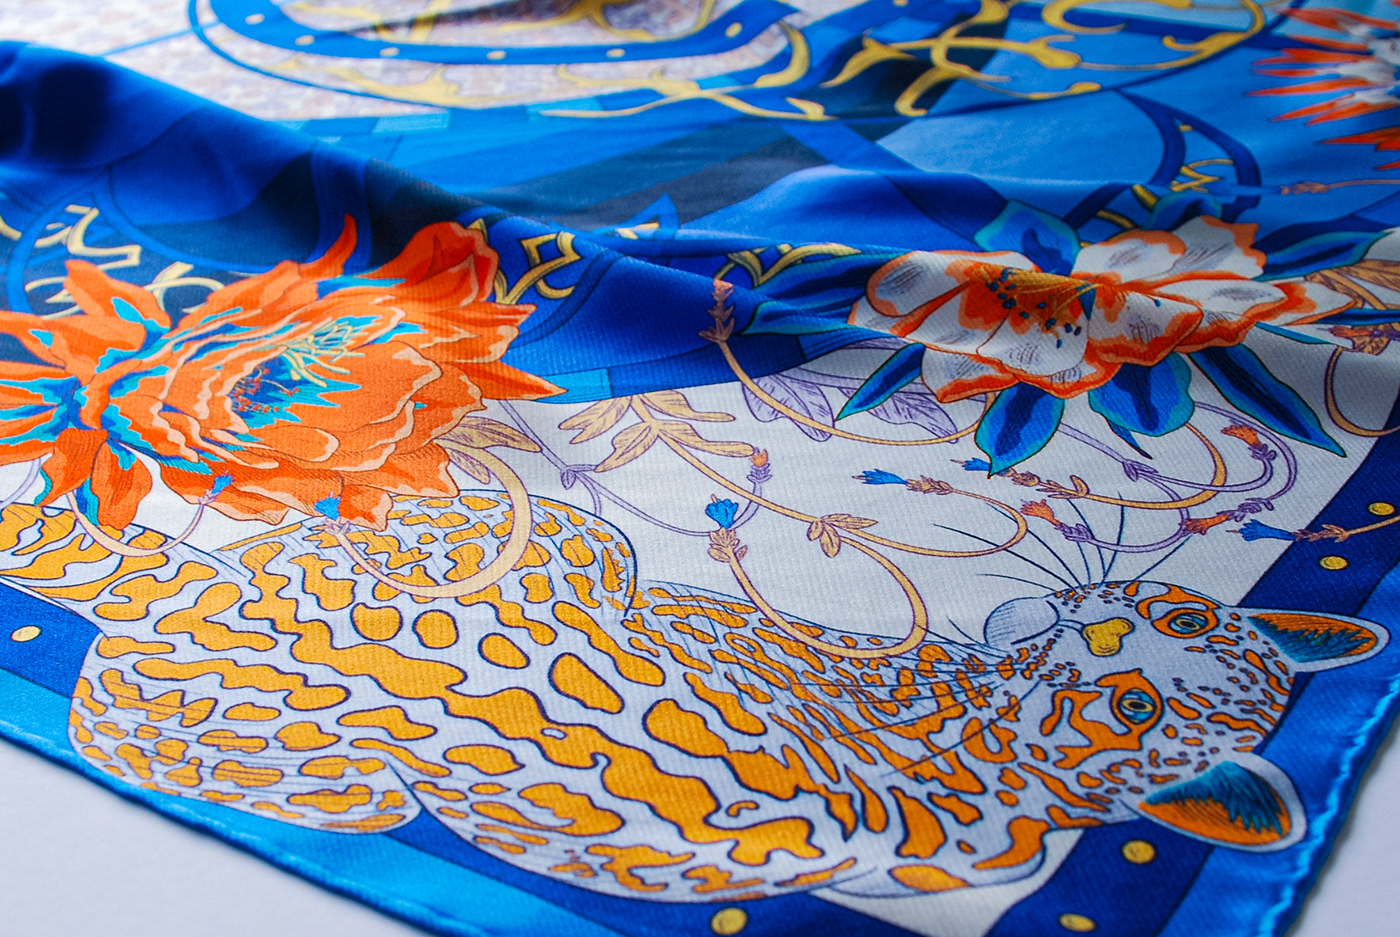 Photograph of a blue silk scarf depicting an ocelot and flowers.